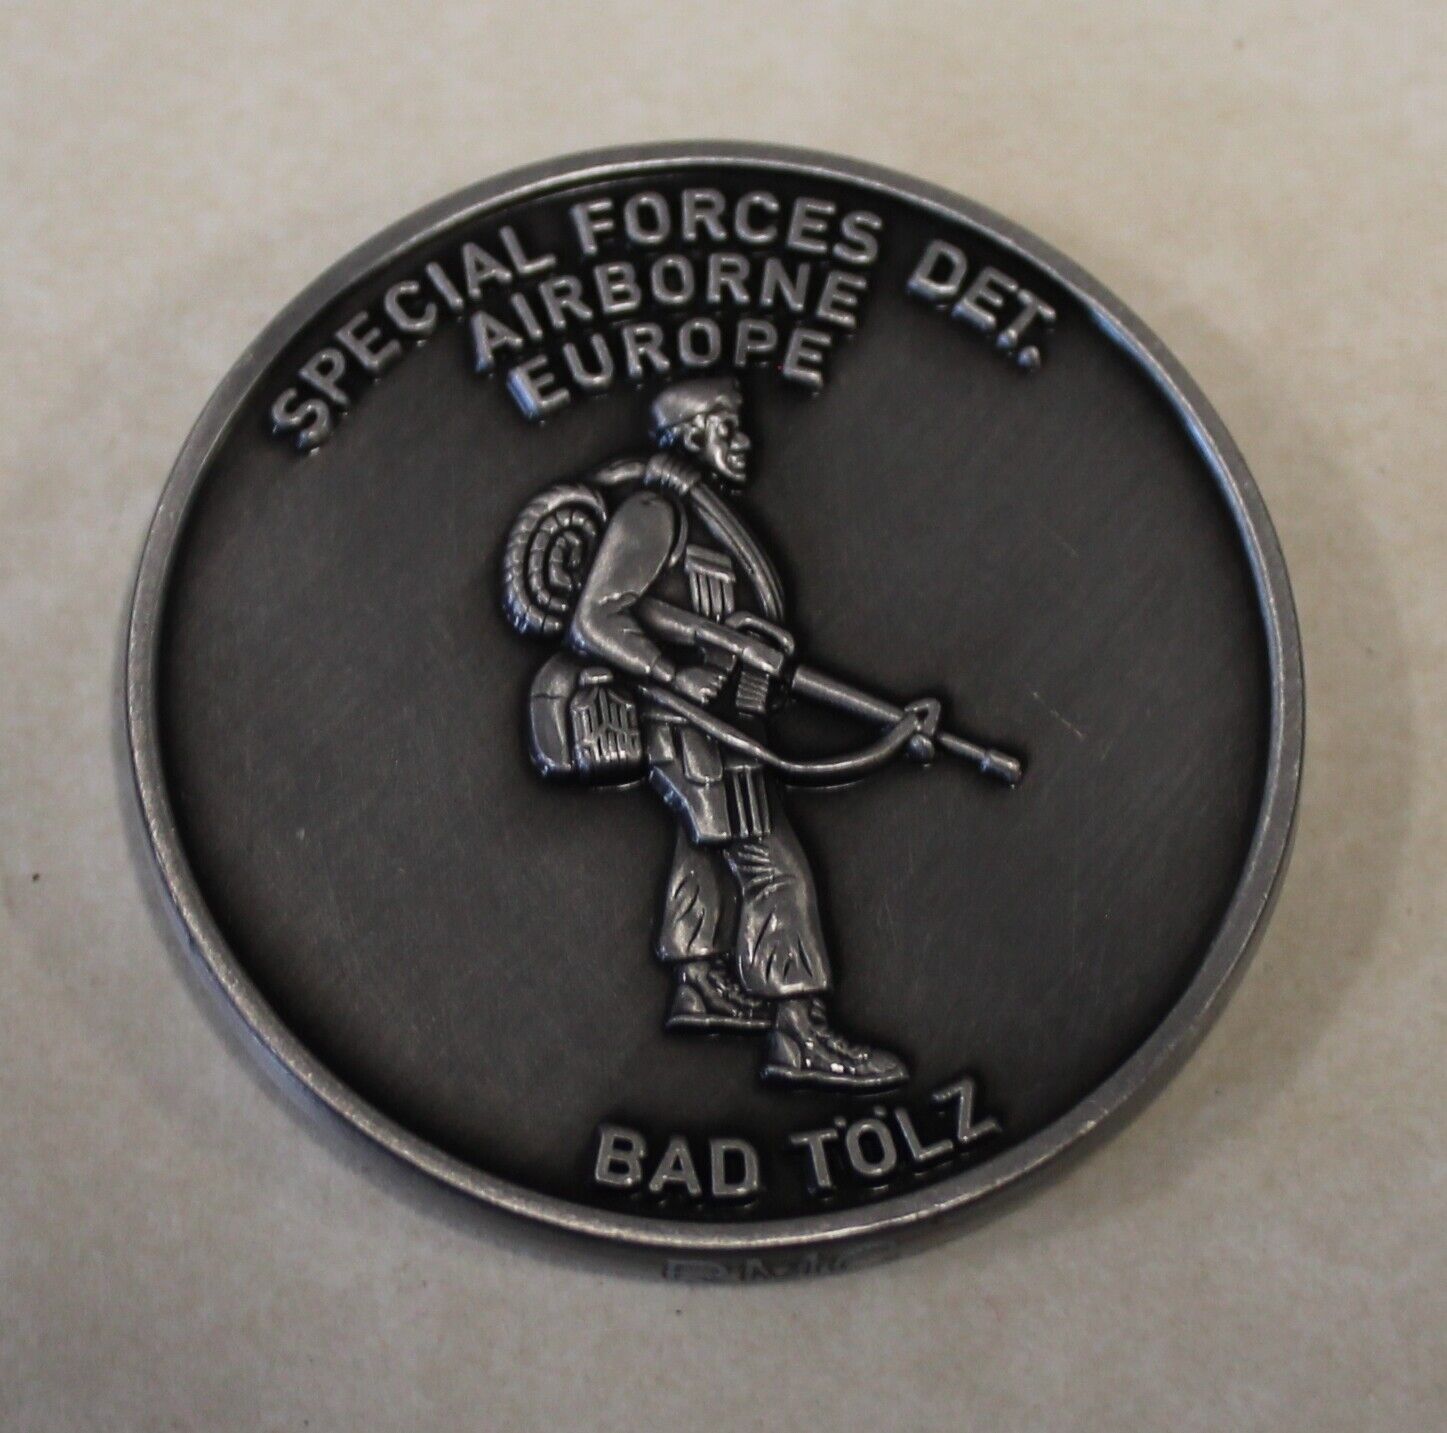 10th Special Forces Grp Airborne DET Europe Bad Tolz Germany Army Challenge Coin